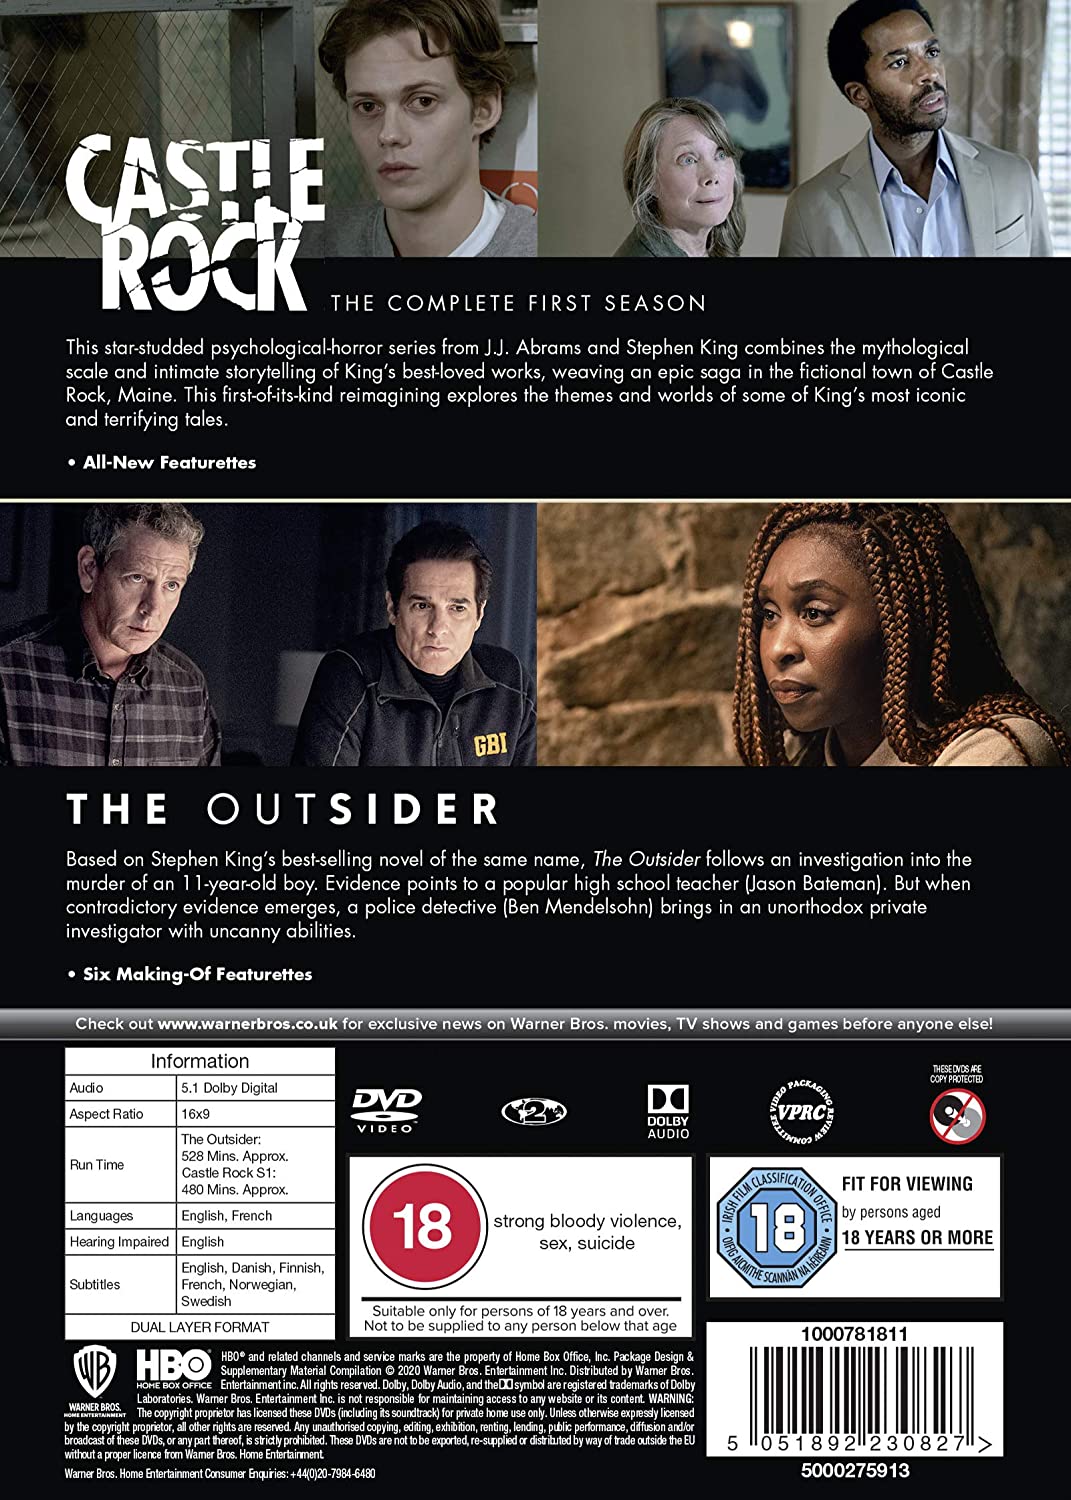 Castle Rock: Season 1 and The Outsider – 2 Series Collection (DVD)